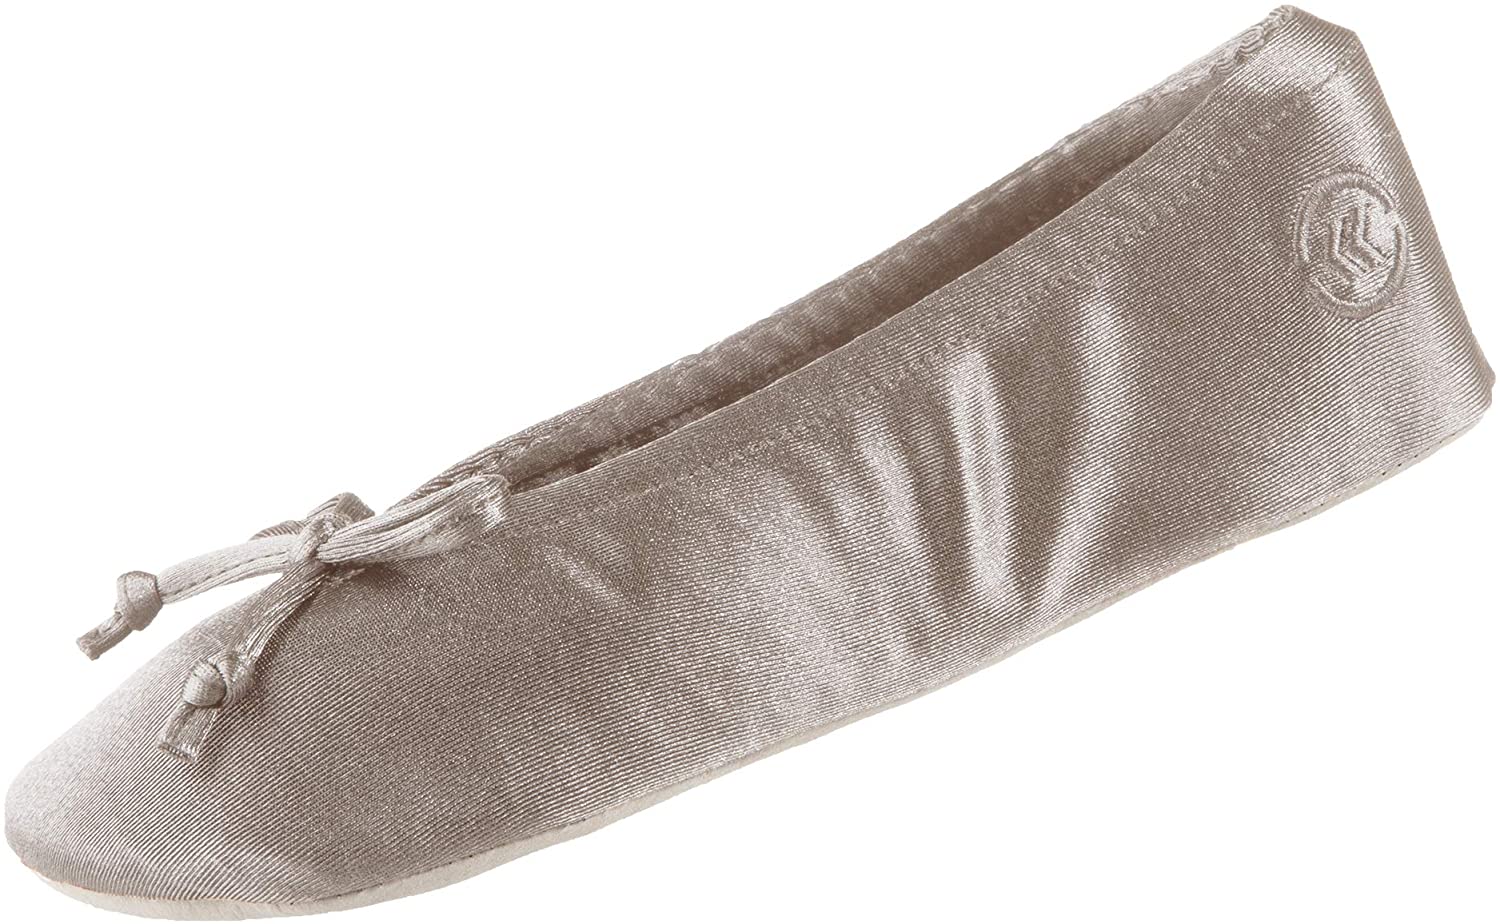 Isotoner Women's Satin Ballerina Slippers with a Soft Tie Bow and Suede Sole 